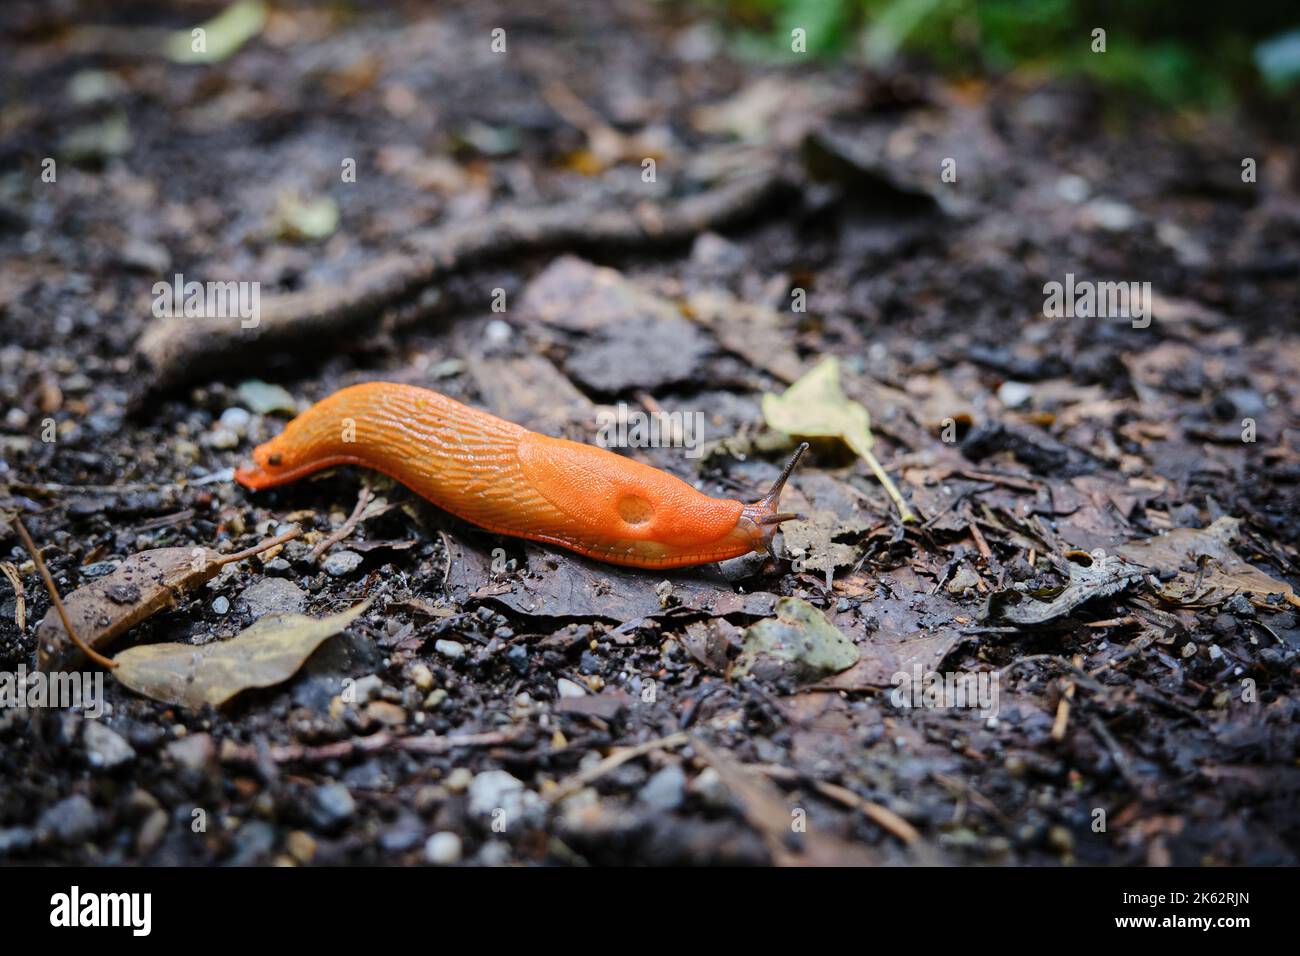 Close up of the red slug, Arion rufus. Also known as large red slug, chocolate arion and European red slug. The Netherlands, Limburg, August 2021 Stock Photo